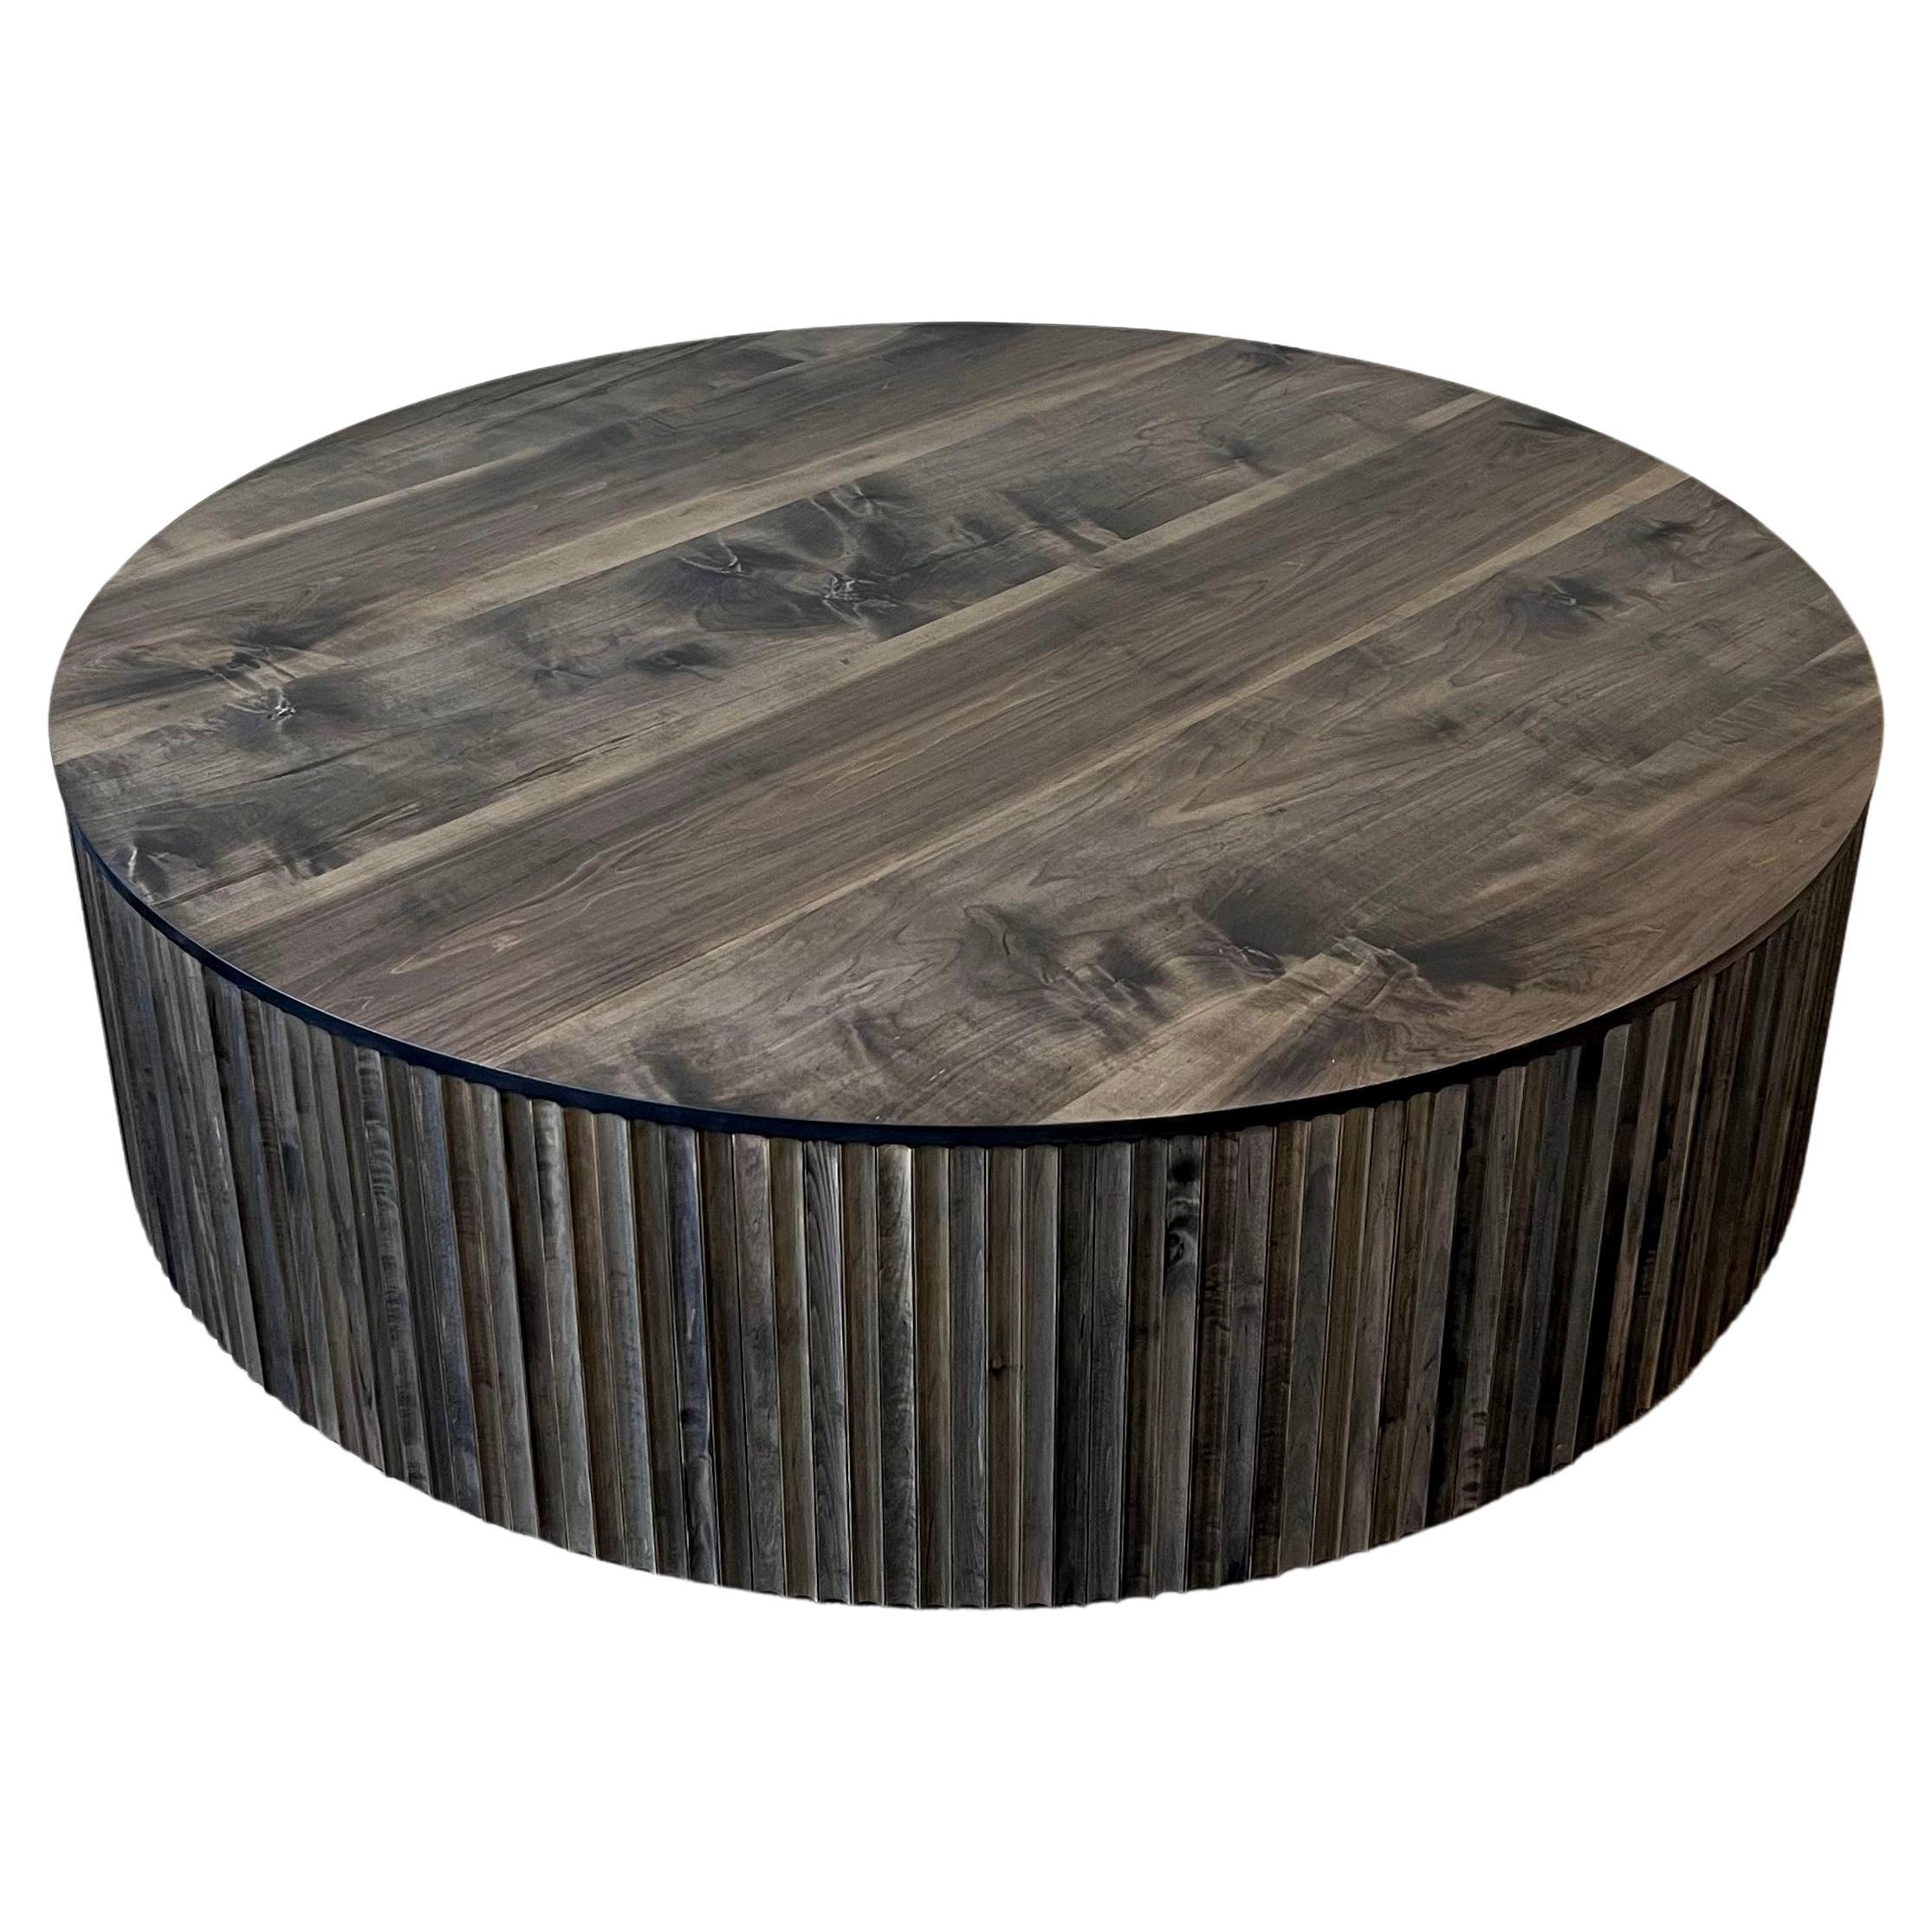 Pilar Round Coffee Table Large / Oxidized Maple Wood by INDO-